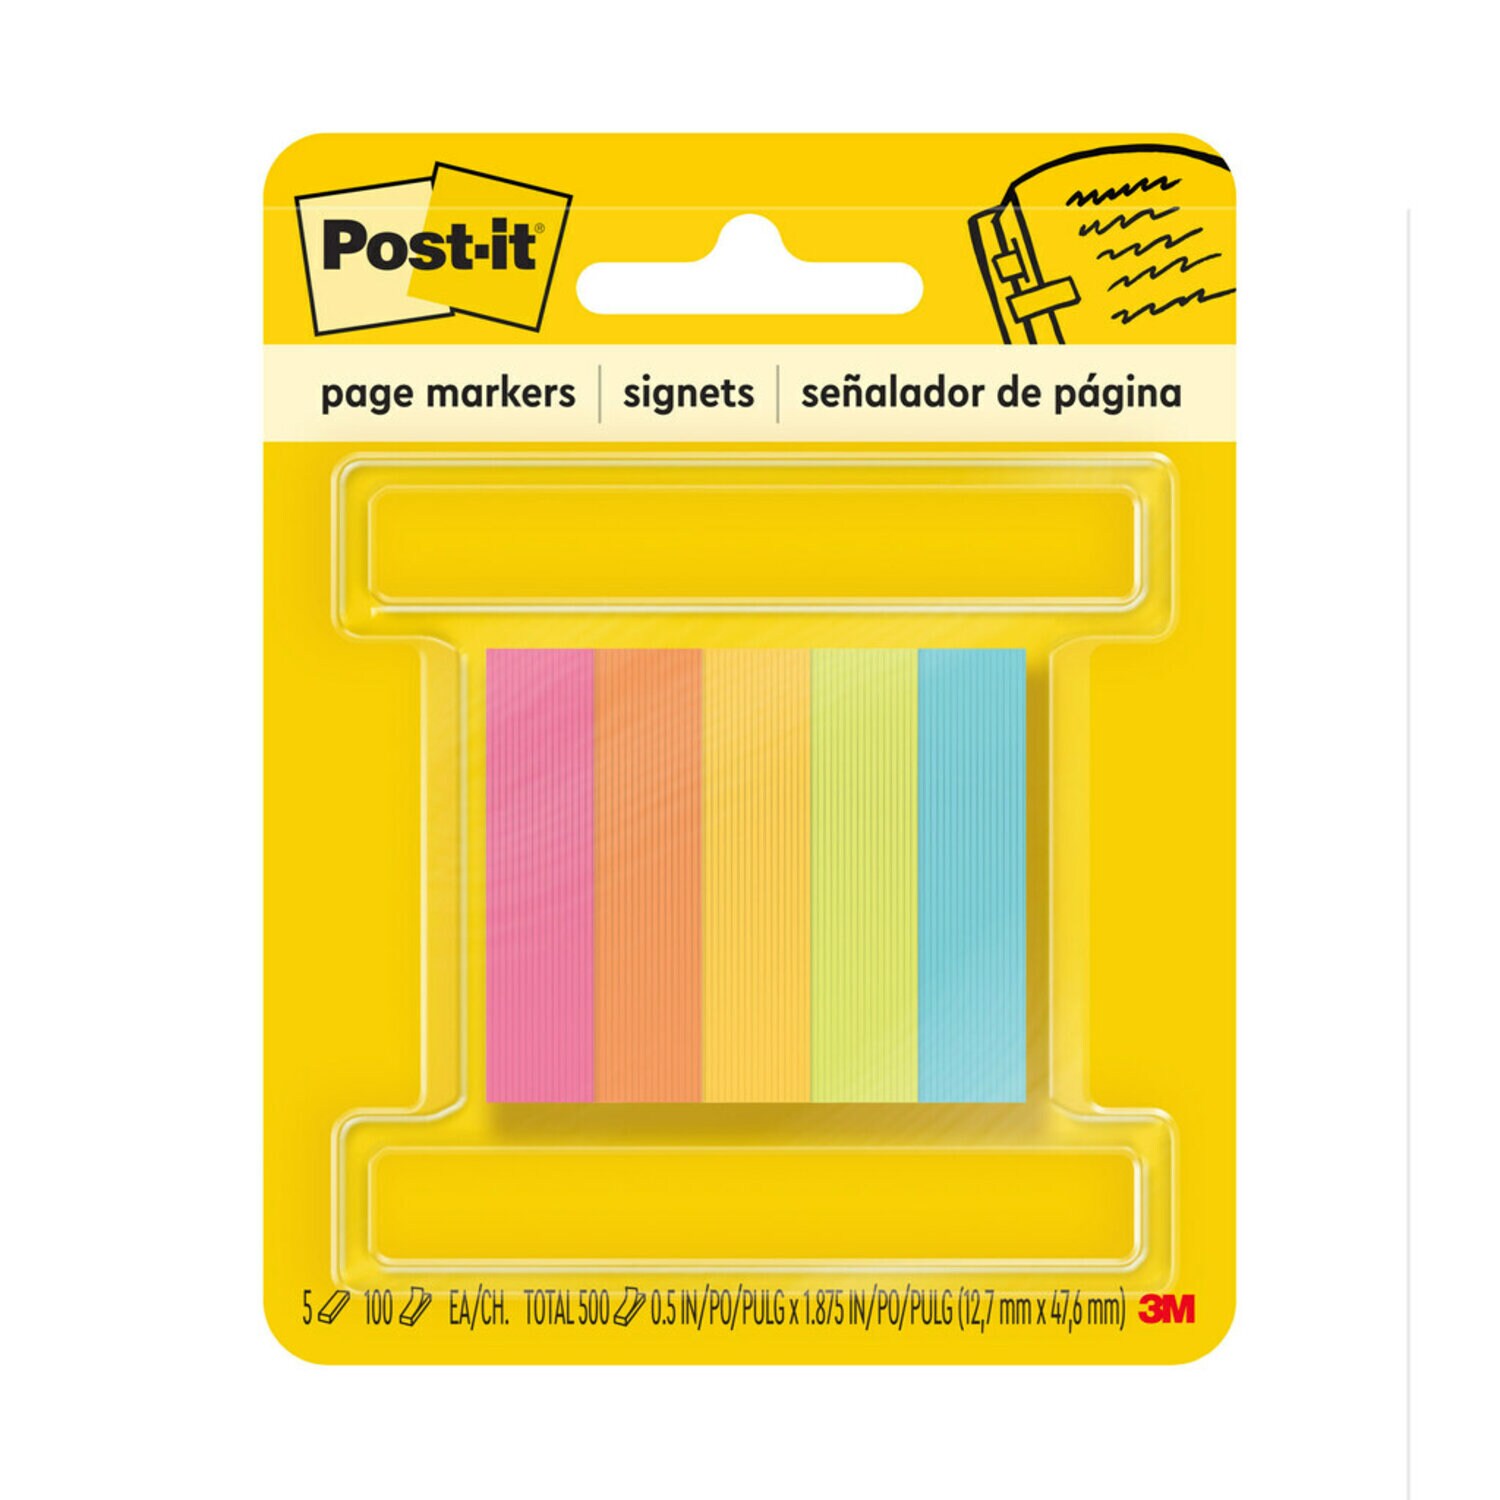 7100247678 - Post-it Page Markers 670-5AN, 1/2 in x 1 7/8 in (12.7 mm x 47.6 mm)